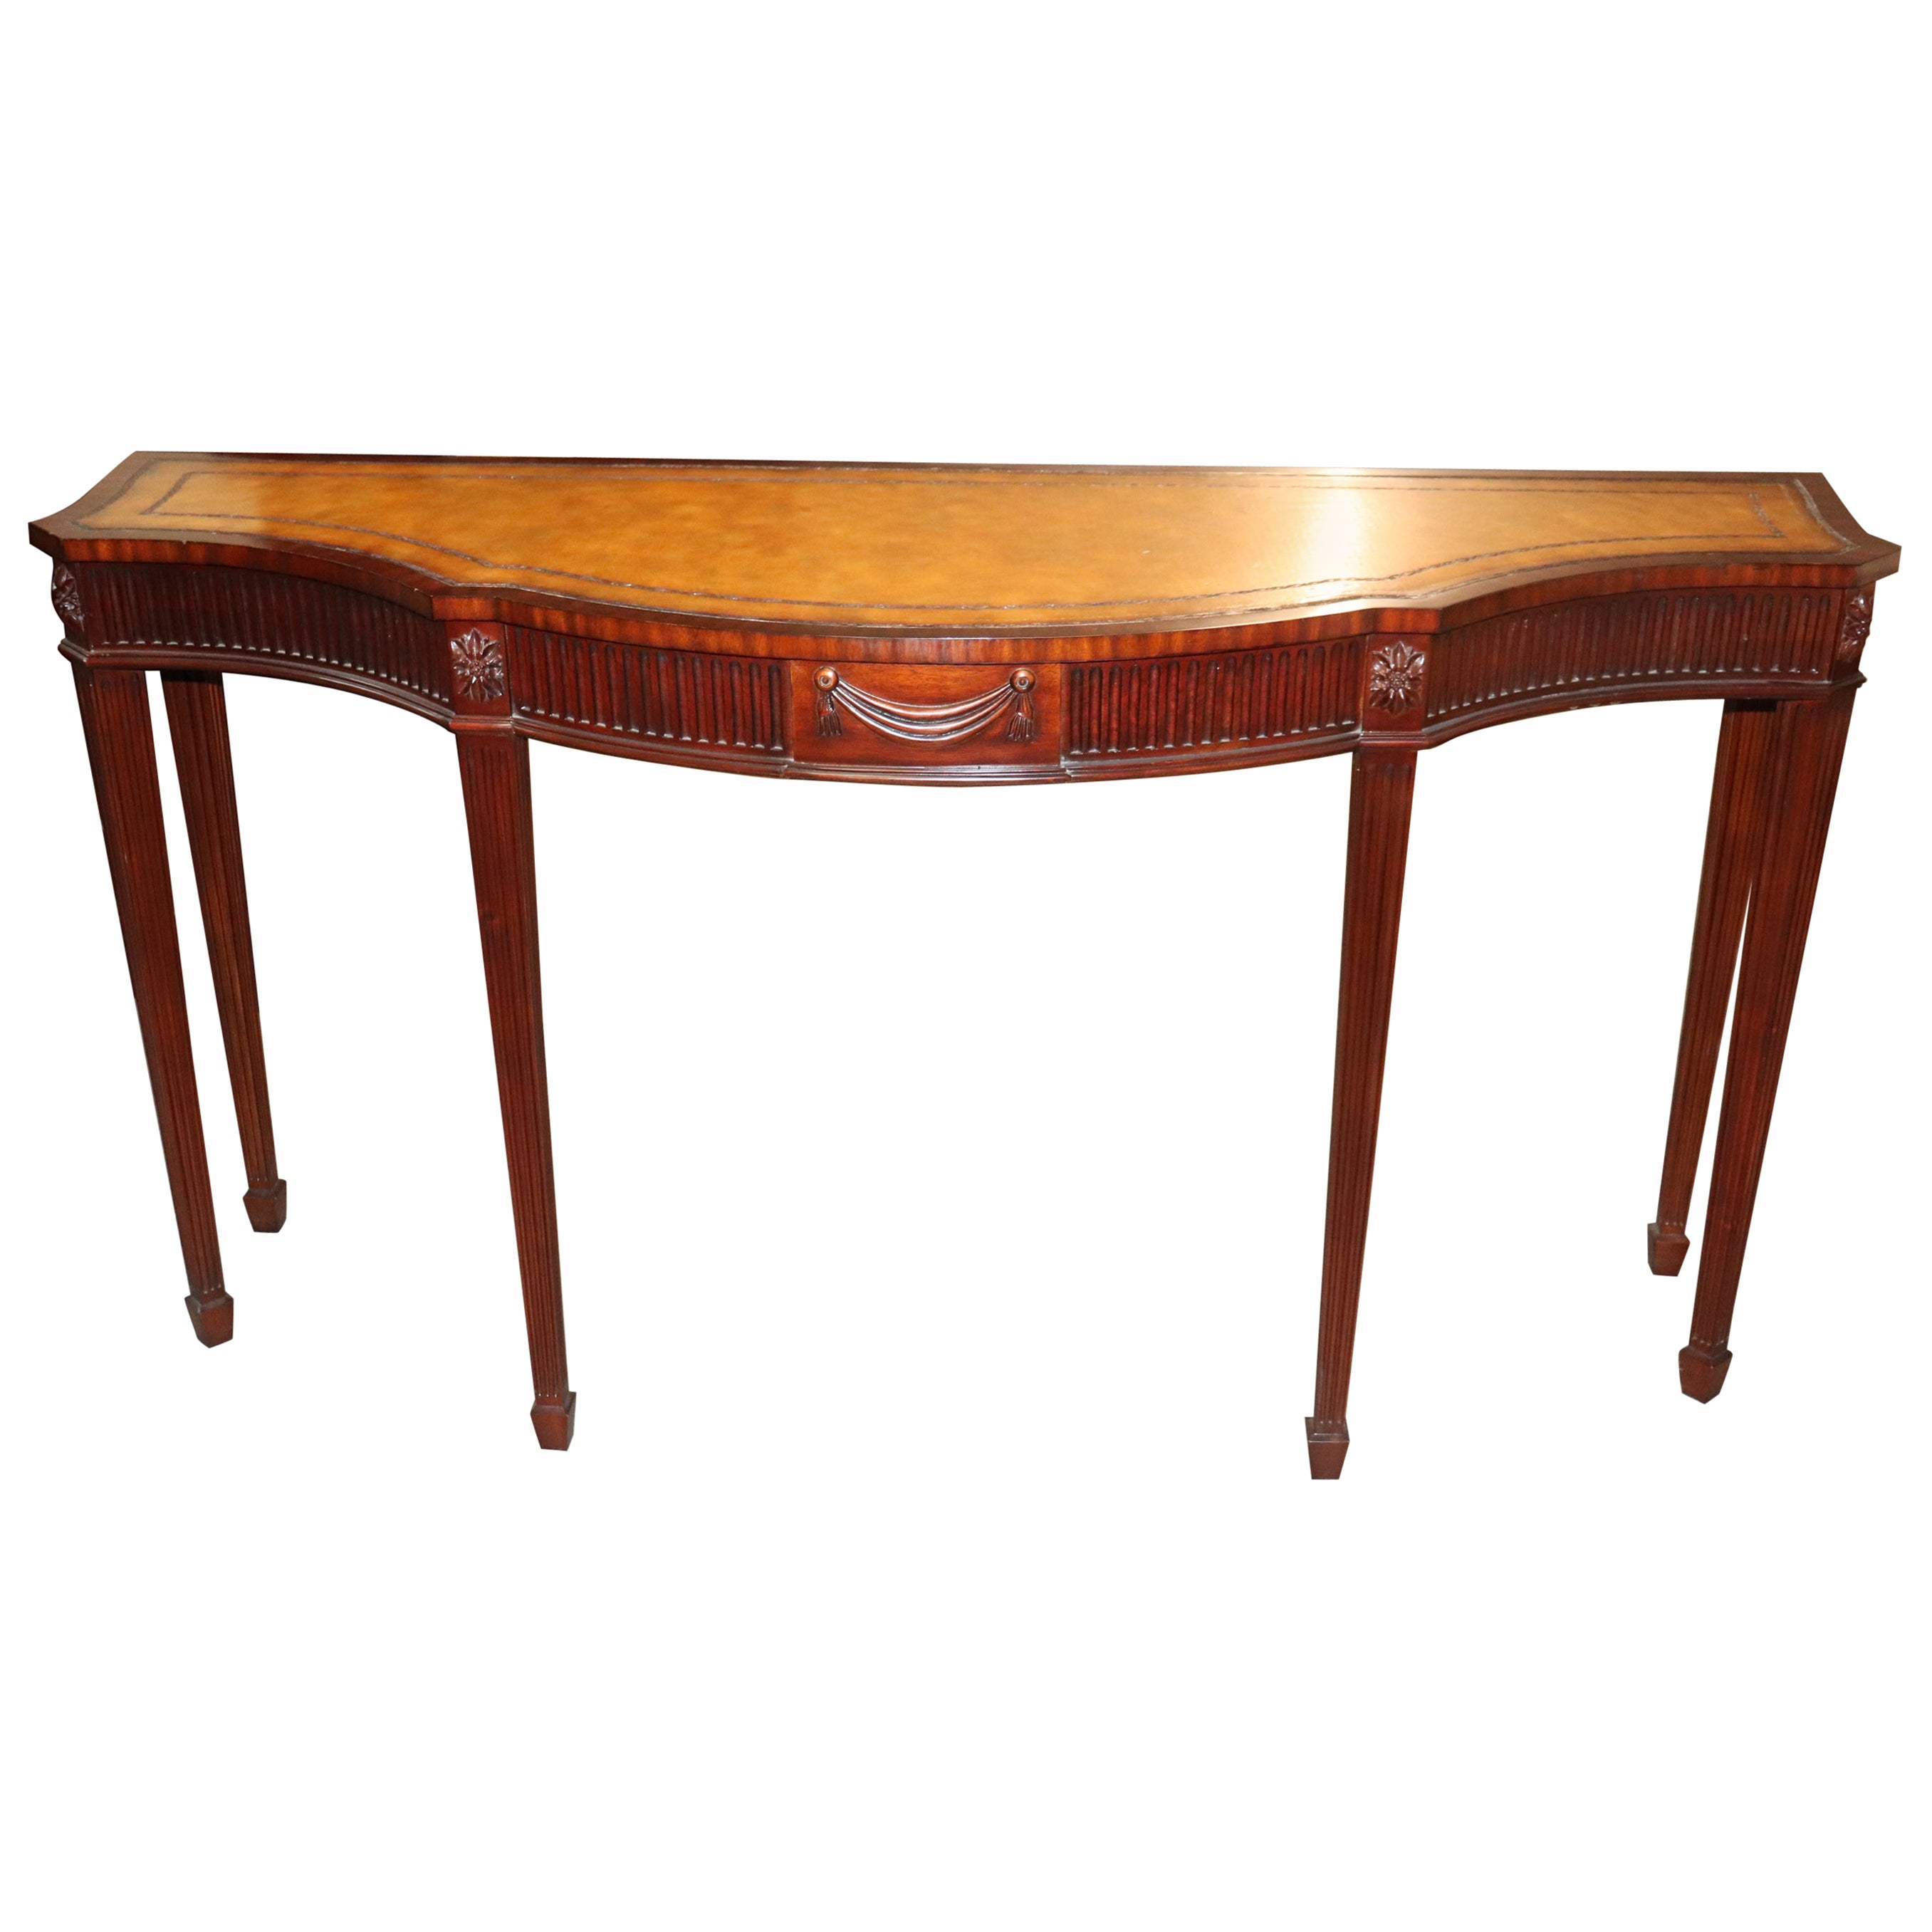 Edwardian Style Solid Mahogany Leather Top Maitland Smith Console Table